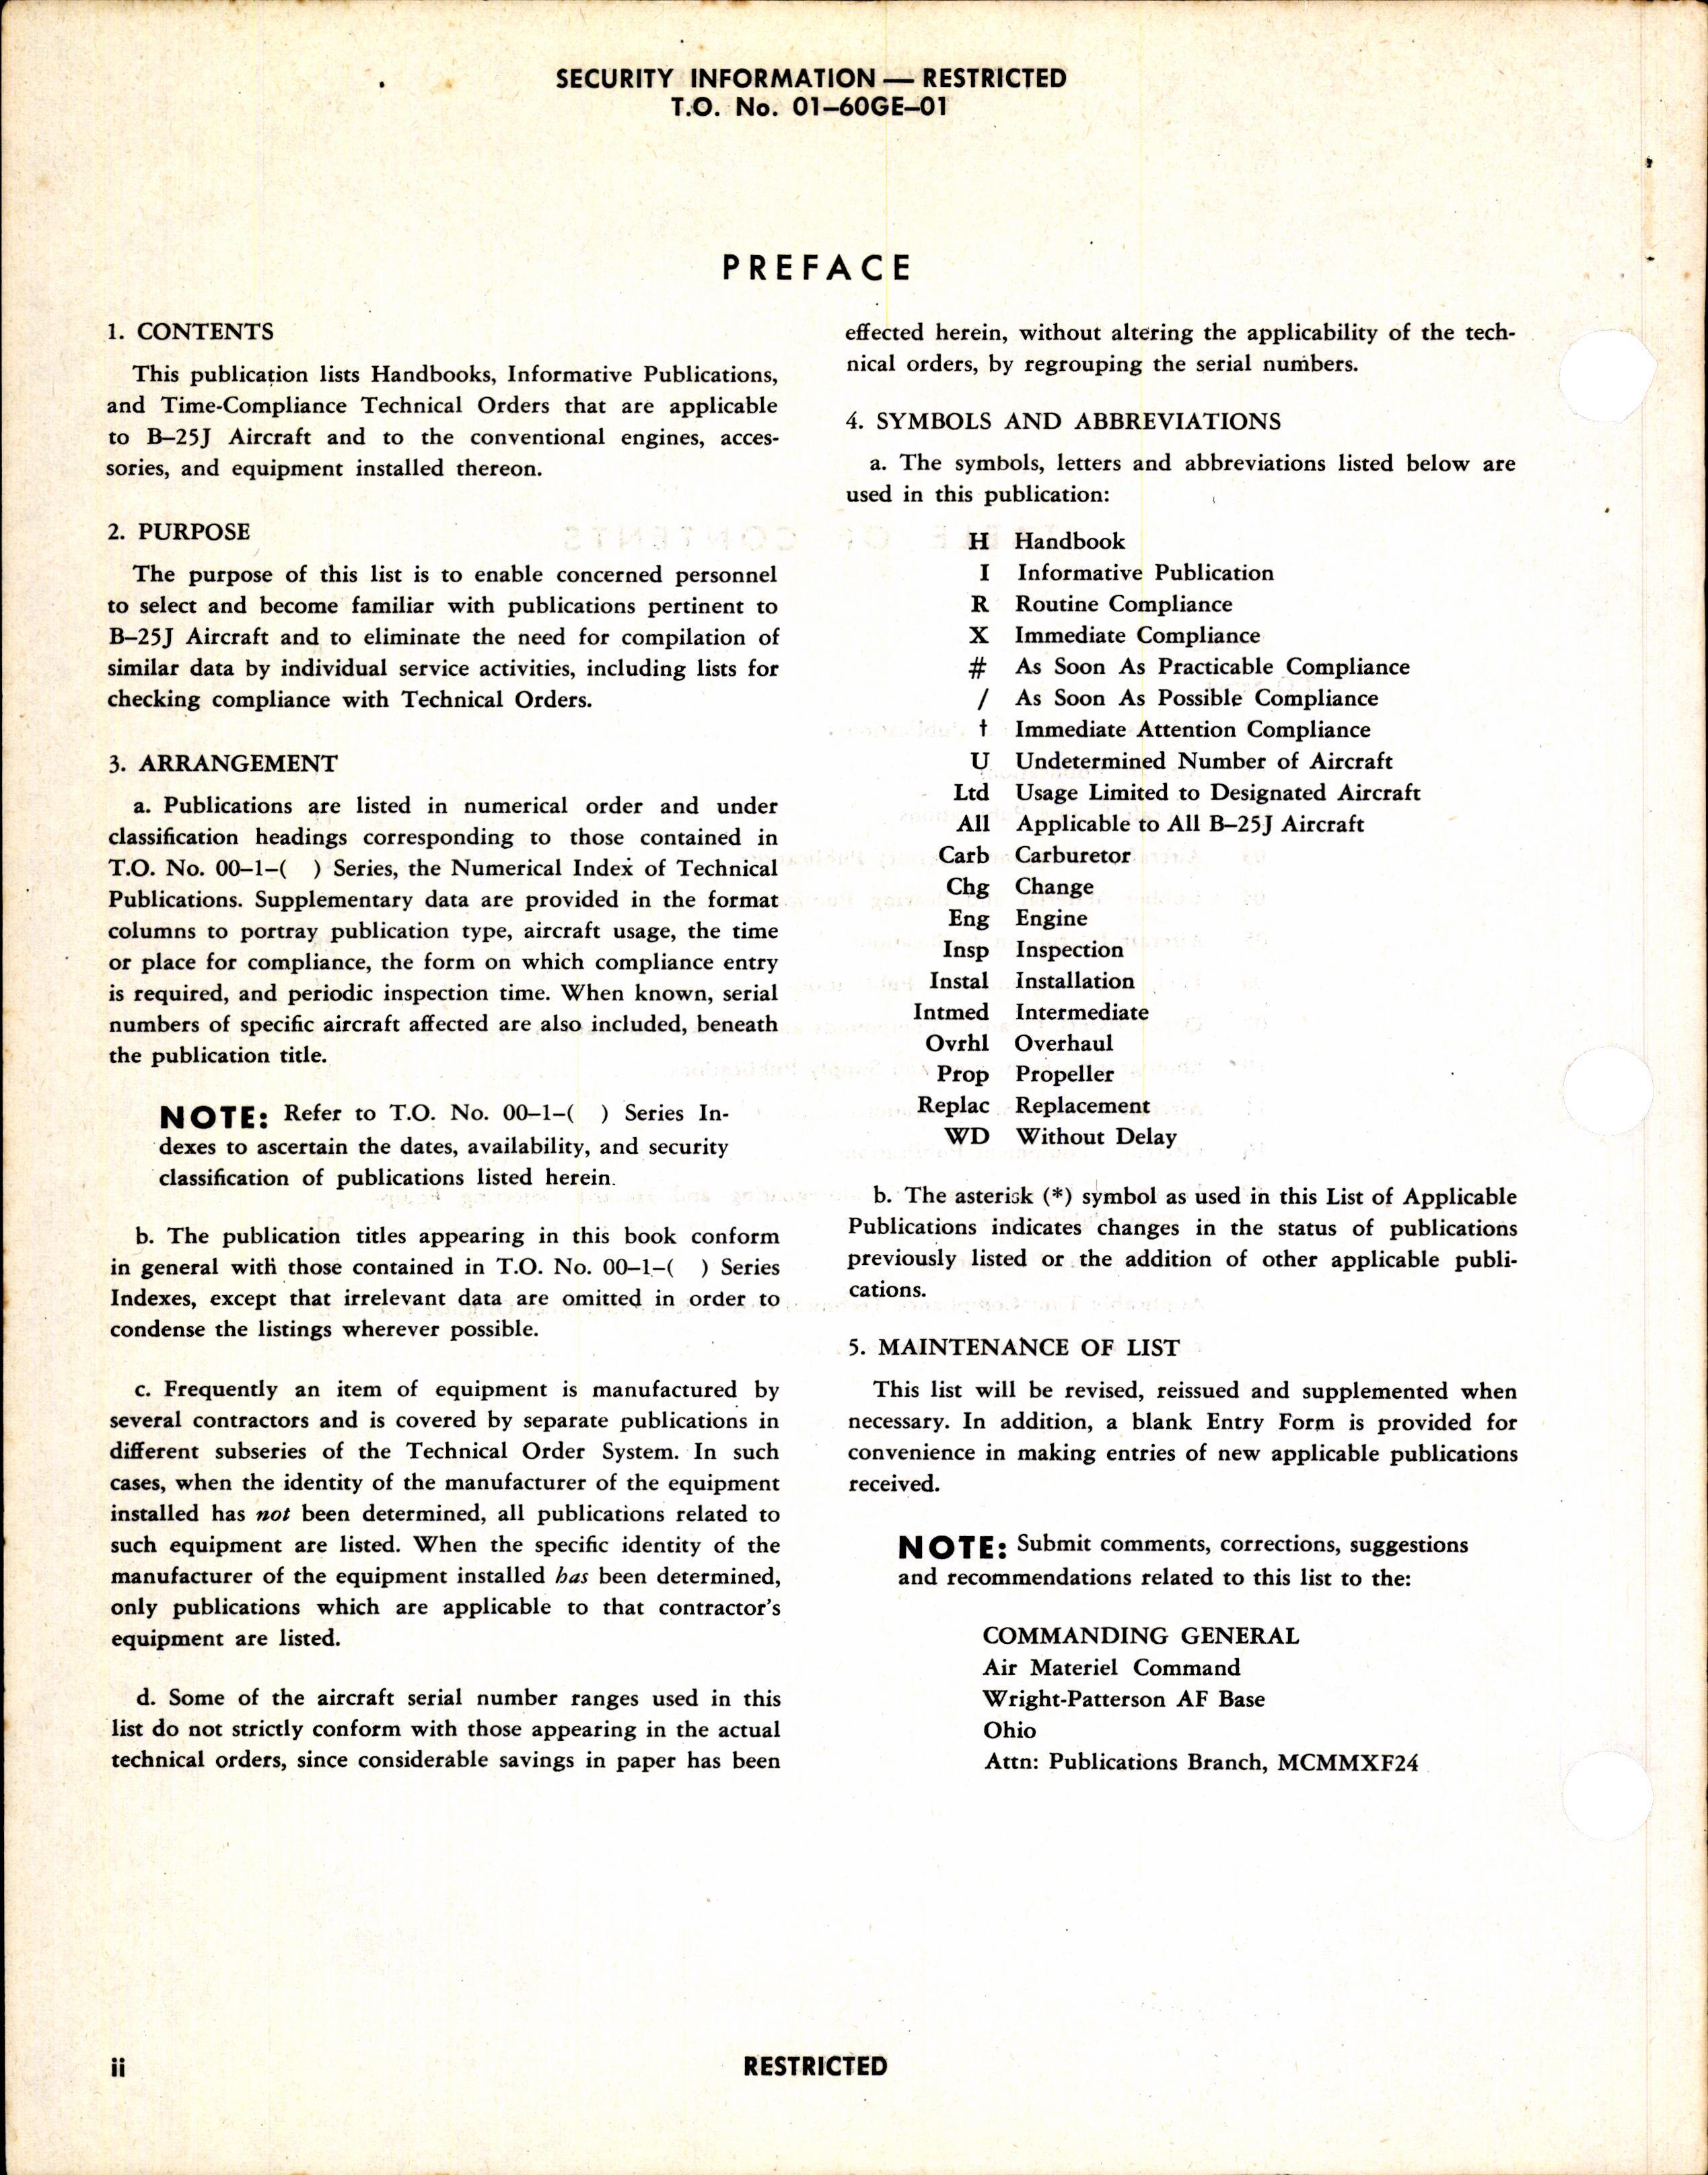 Sample page 4 from AirCorps Library document: List of Applicable Publications for the B-25J (Aircraft & Equipment)